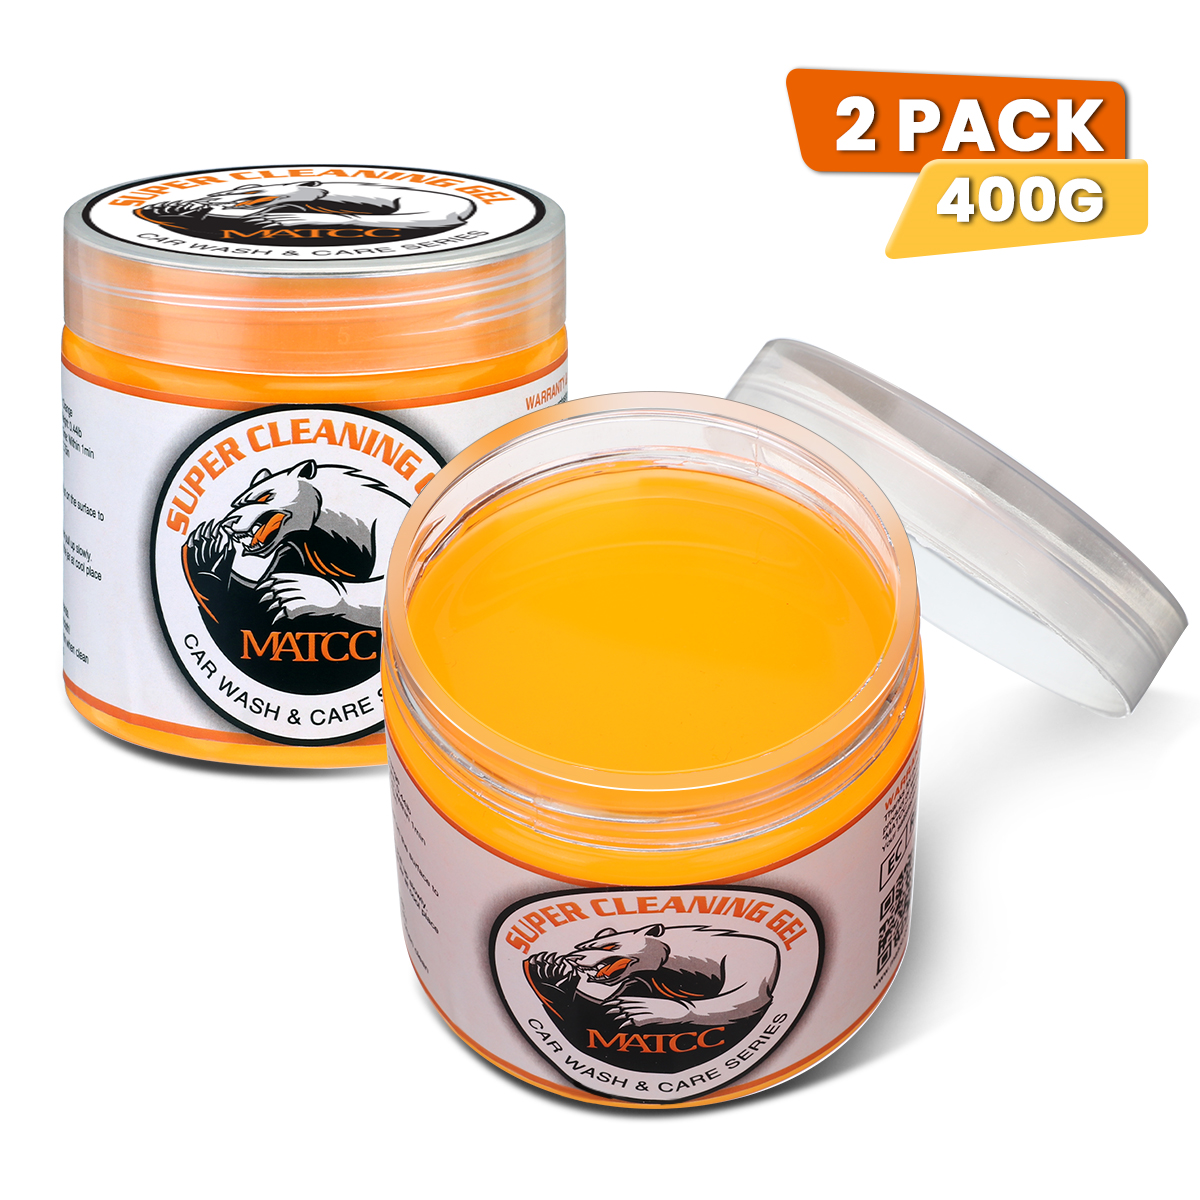 MATCC-400g-Car-Detailing-Cleaning-Gel-Interior-Cleaner-Automotive-Cleaning-Putty-Dust-Cleaning-Mud-f-1669581-1